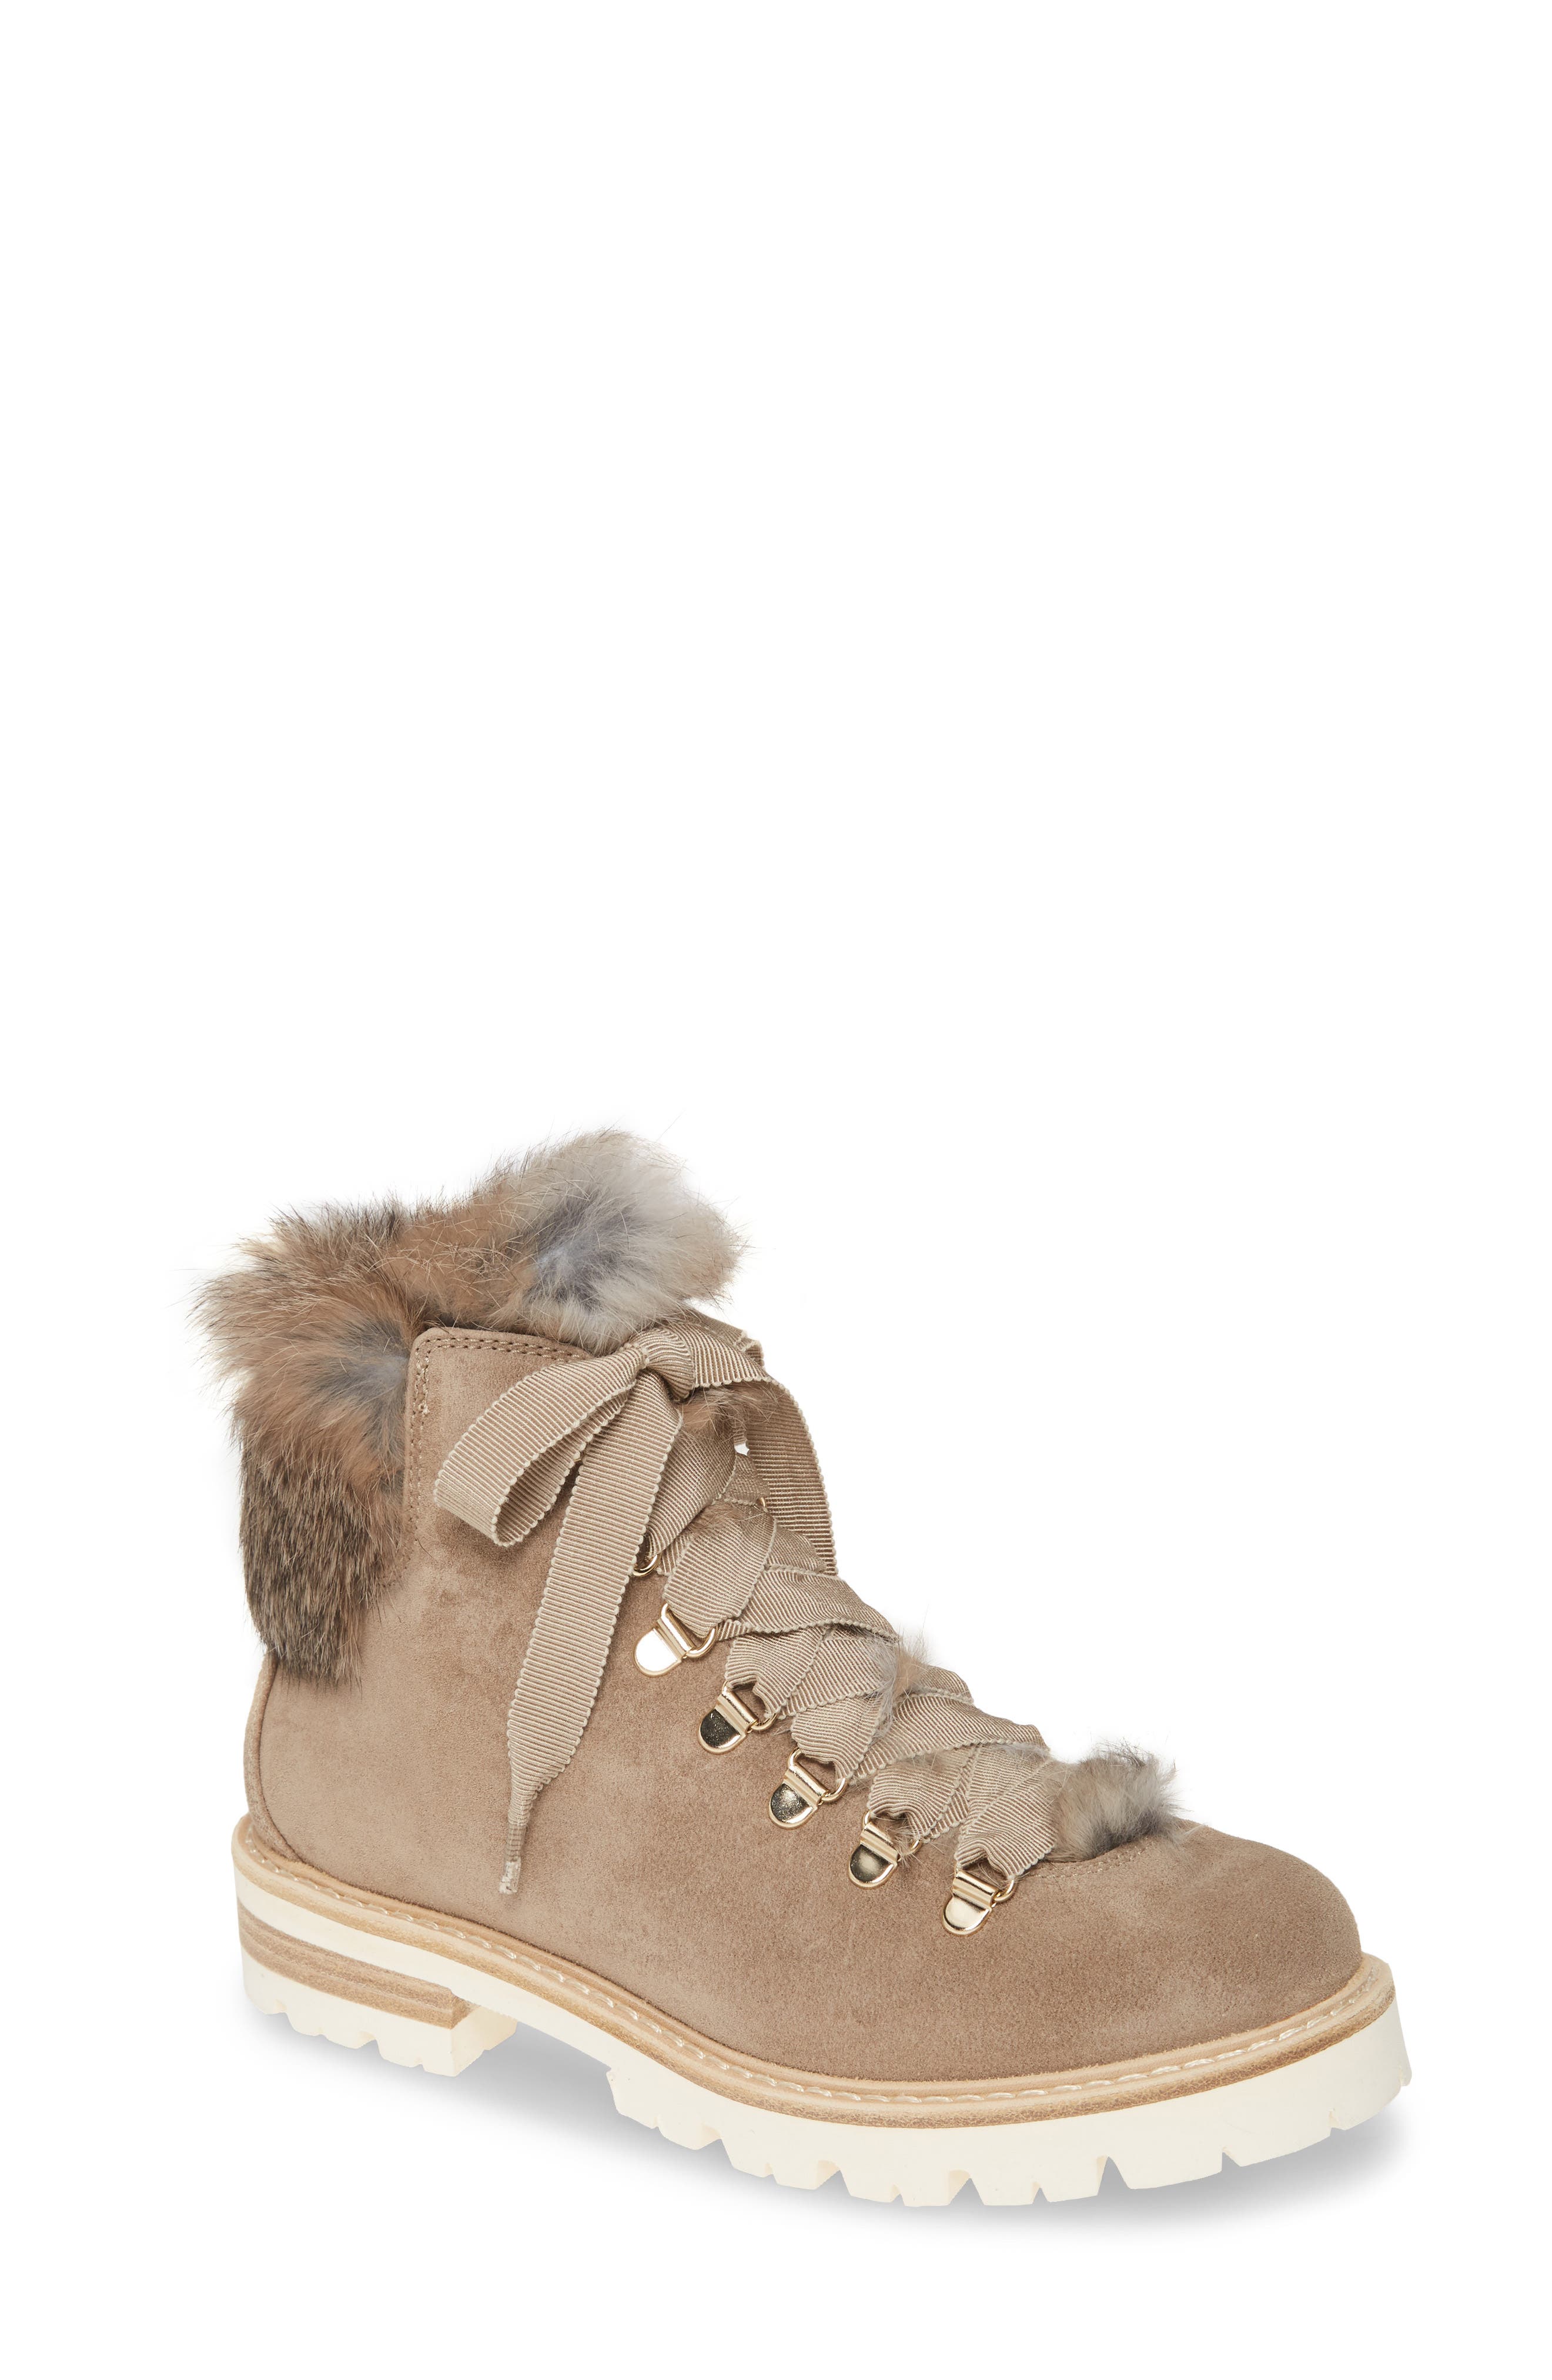 hiker boots with fur